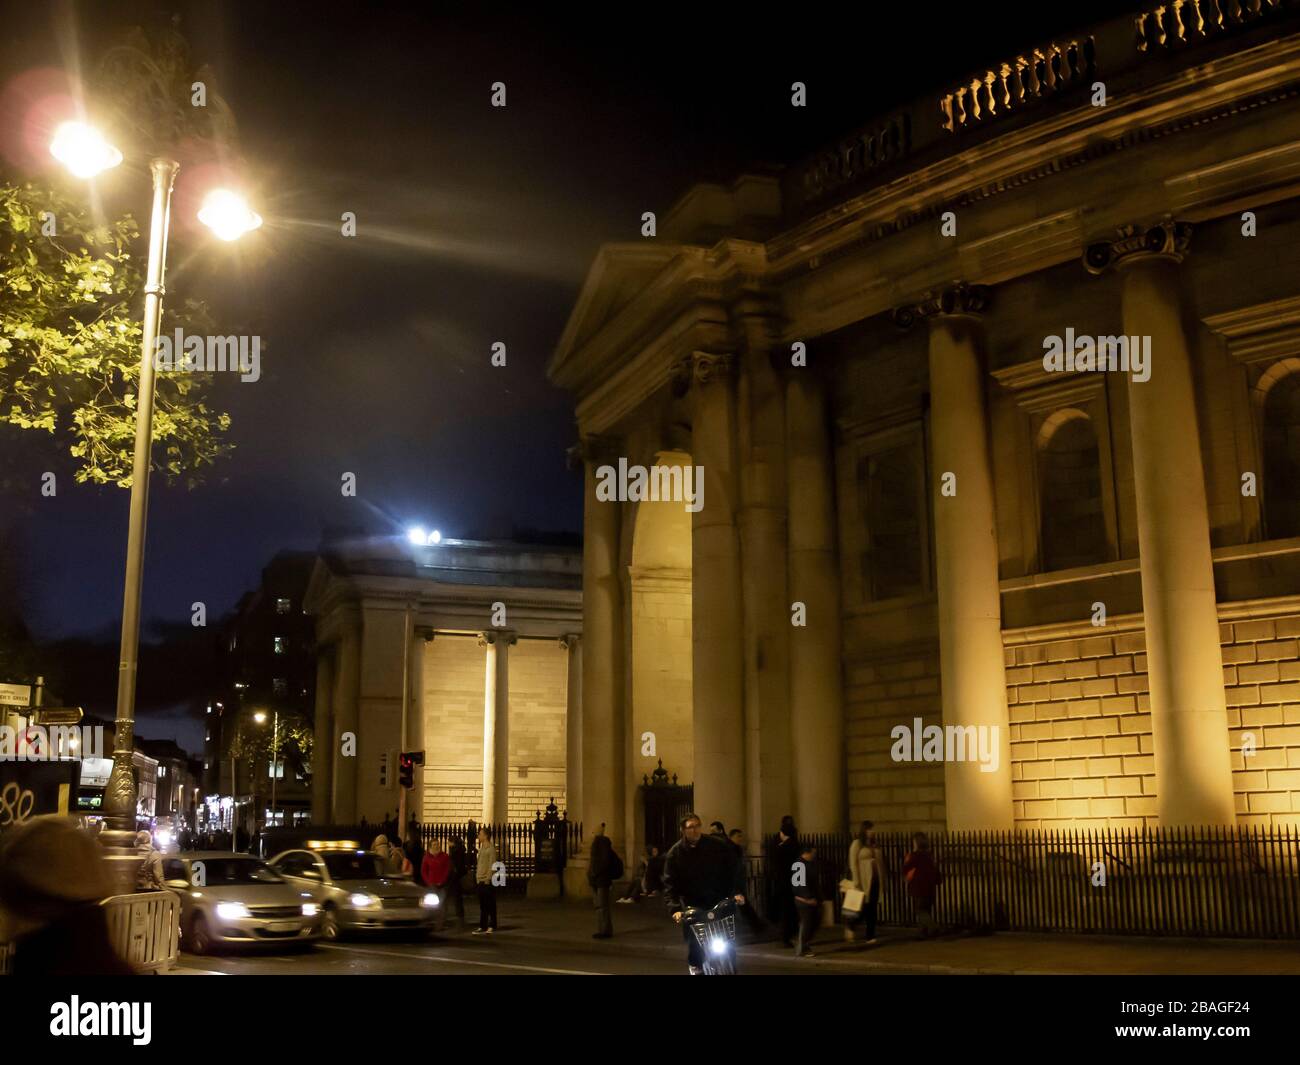 Bank of Ireland headquarters in Dublin during evening rushhour Stock Photo